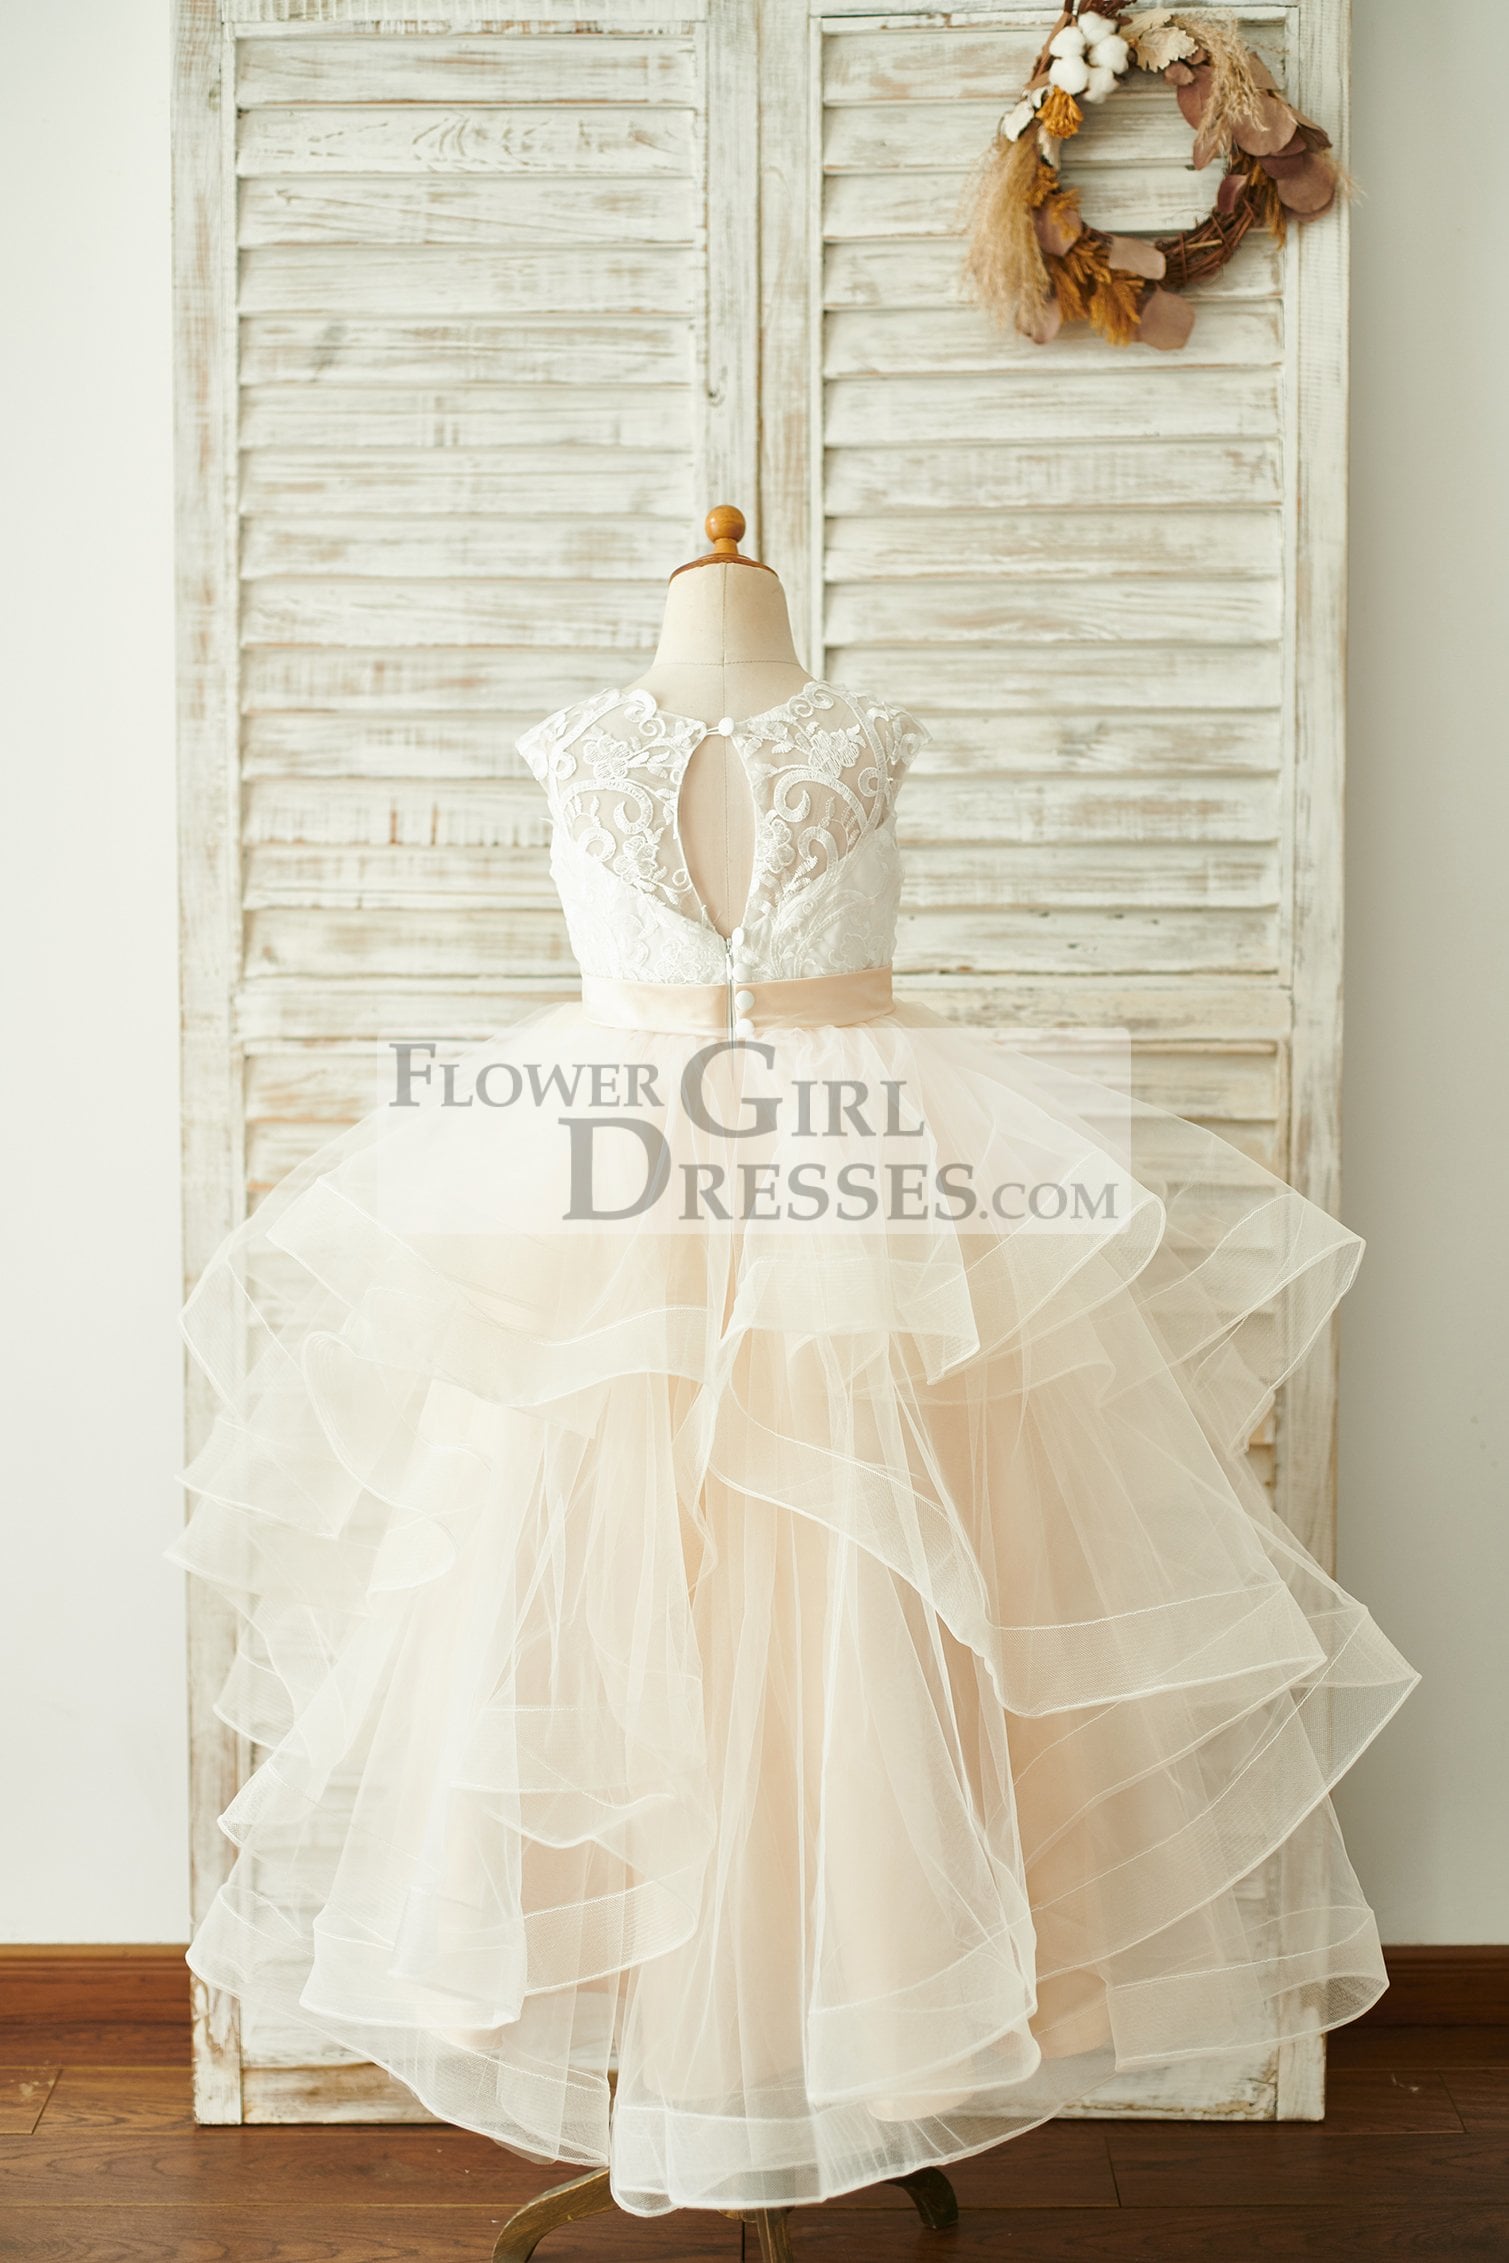 28 Matching Flower Girl Dresses To Bridal Gowns | DPF